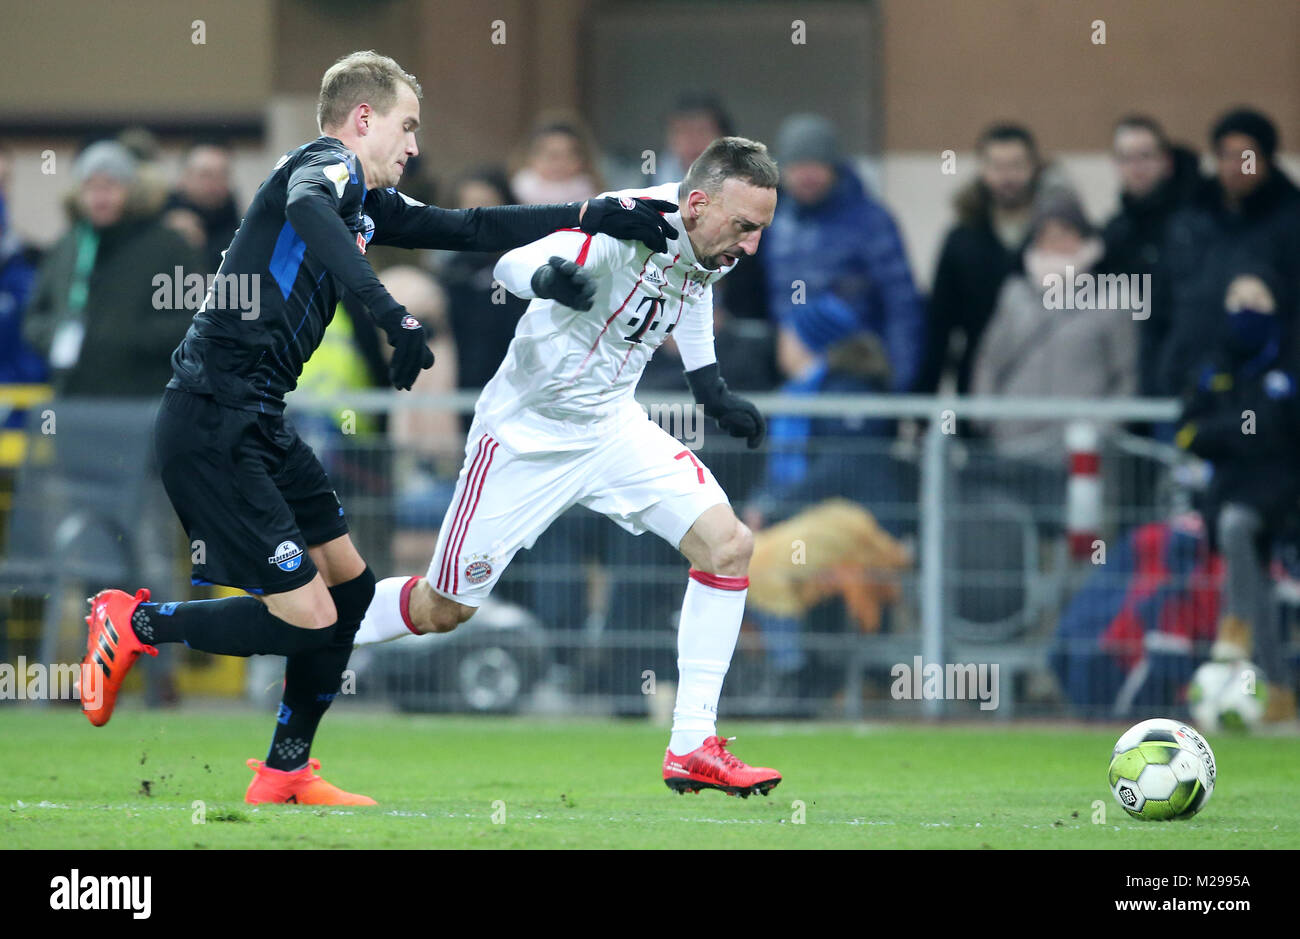 (180207) -- PADERBORN, Feb. 7, 2018(Xinhua) -- Franck Ribery (R) of Bayern Munich vies with Ben Zolinski of Paderborn during the quarterfinal match of German Cup between SC Paderborn and Bayern Munich at Benteler Arena in Paderborn, Germany, on Feb. 6, 2018. Bayern Munich won 6-0. (Xinhua/Ulrich Hufnagel) Stock Photo